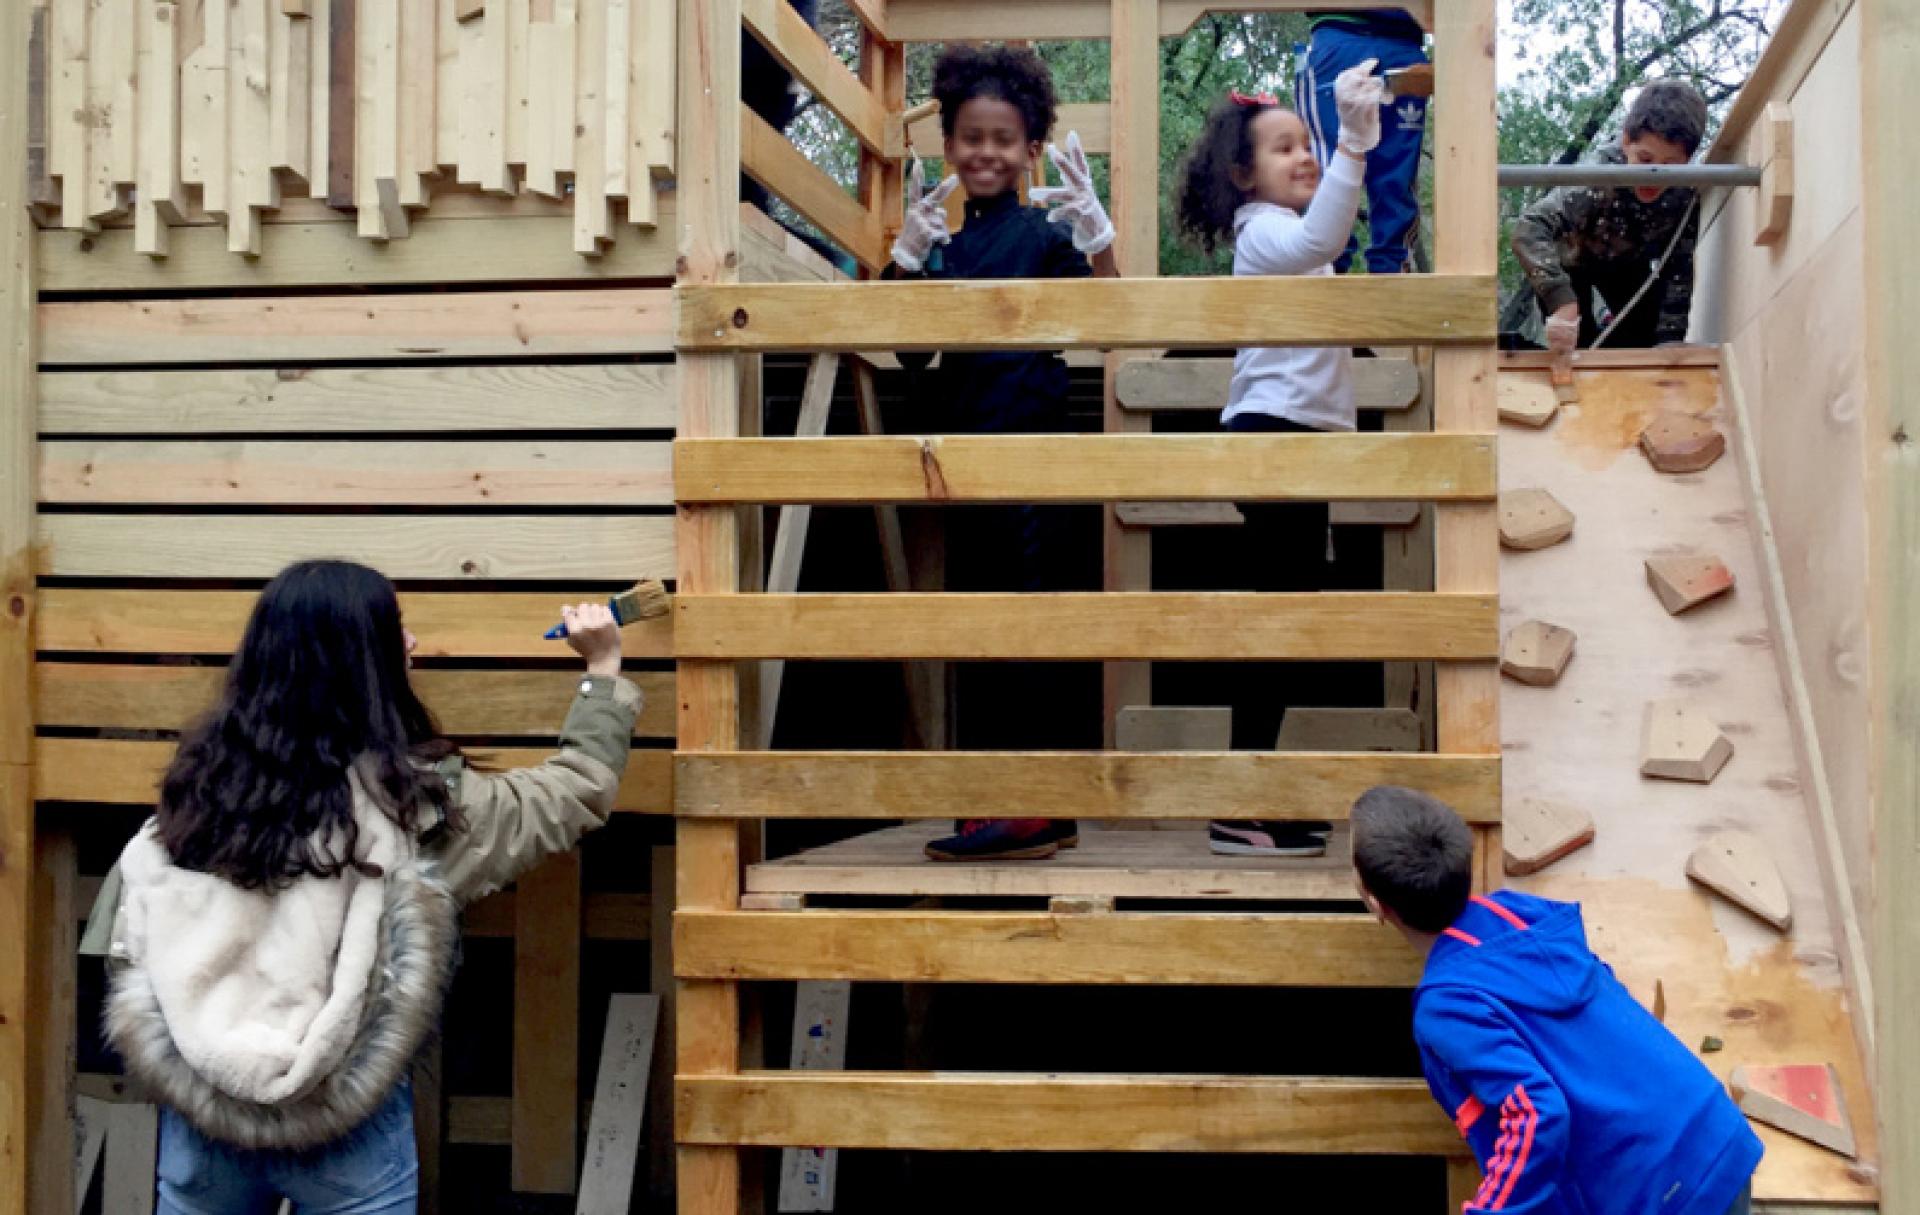 Brincadeira Circular - a circular playground built together with the students of Escola Fernanda de Castro in Lisbon, where they can playfully learn about principles of circular economy and sustainability. | Photo: Colectivo Warehouse